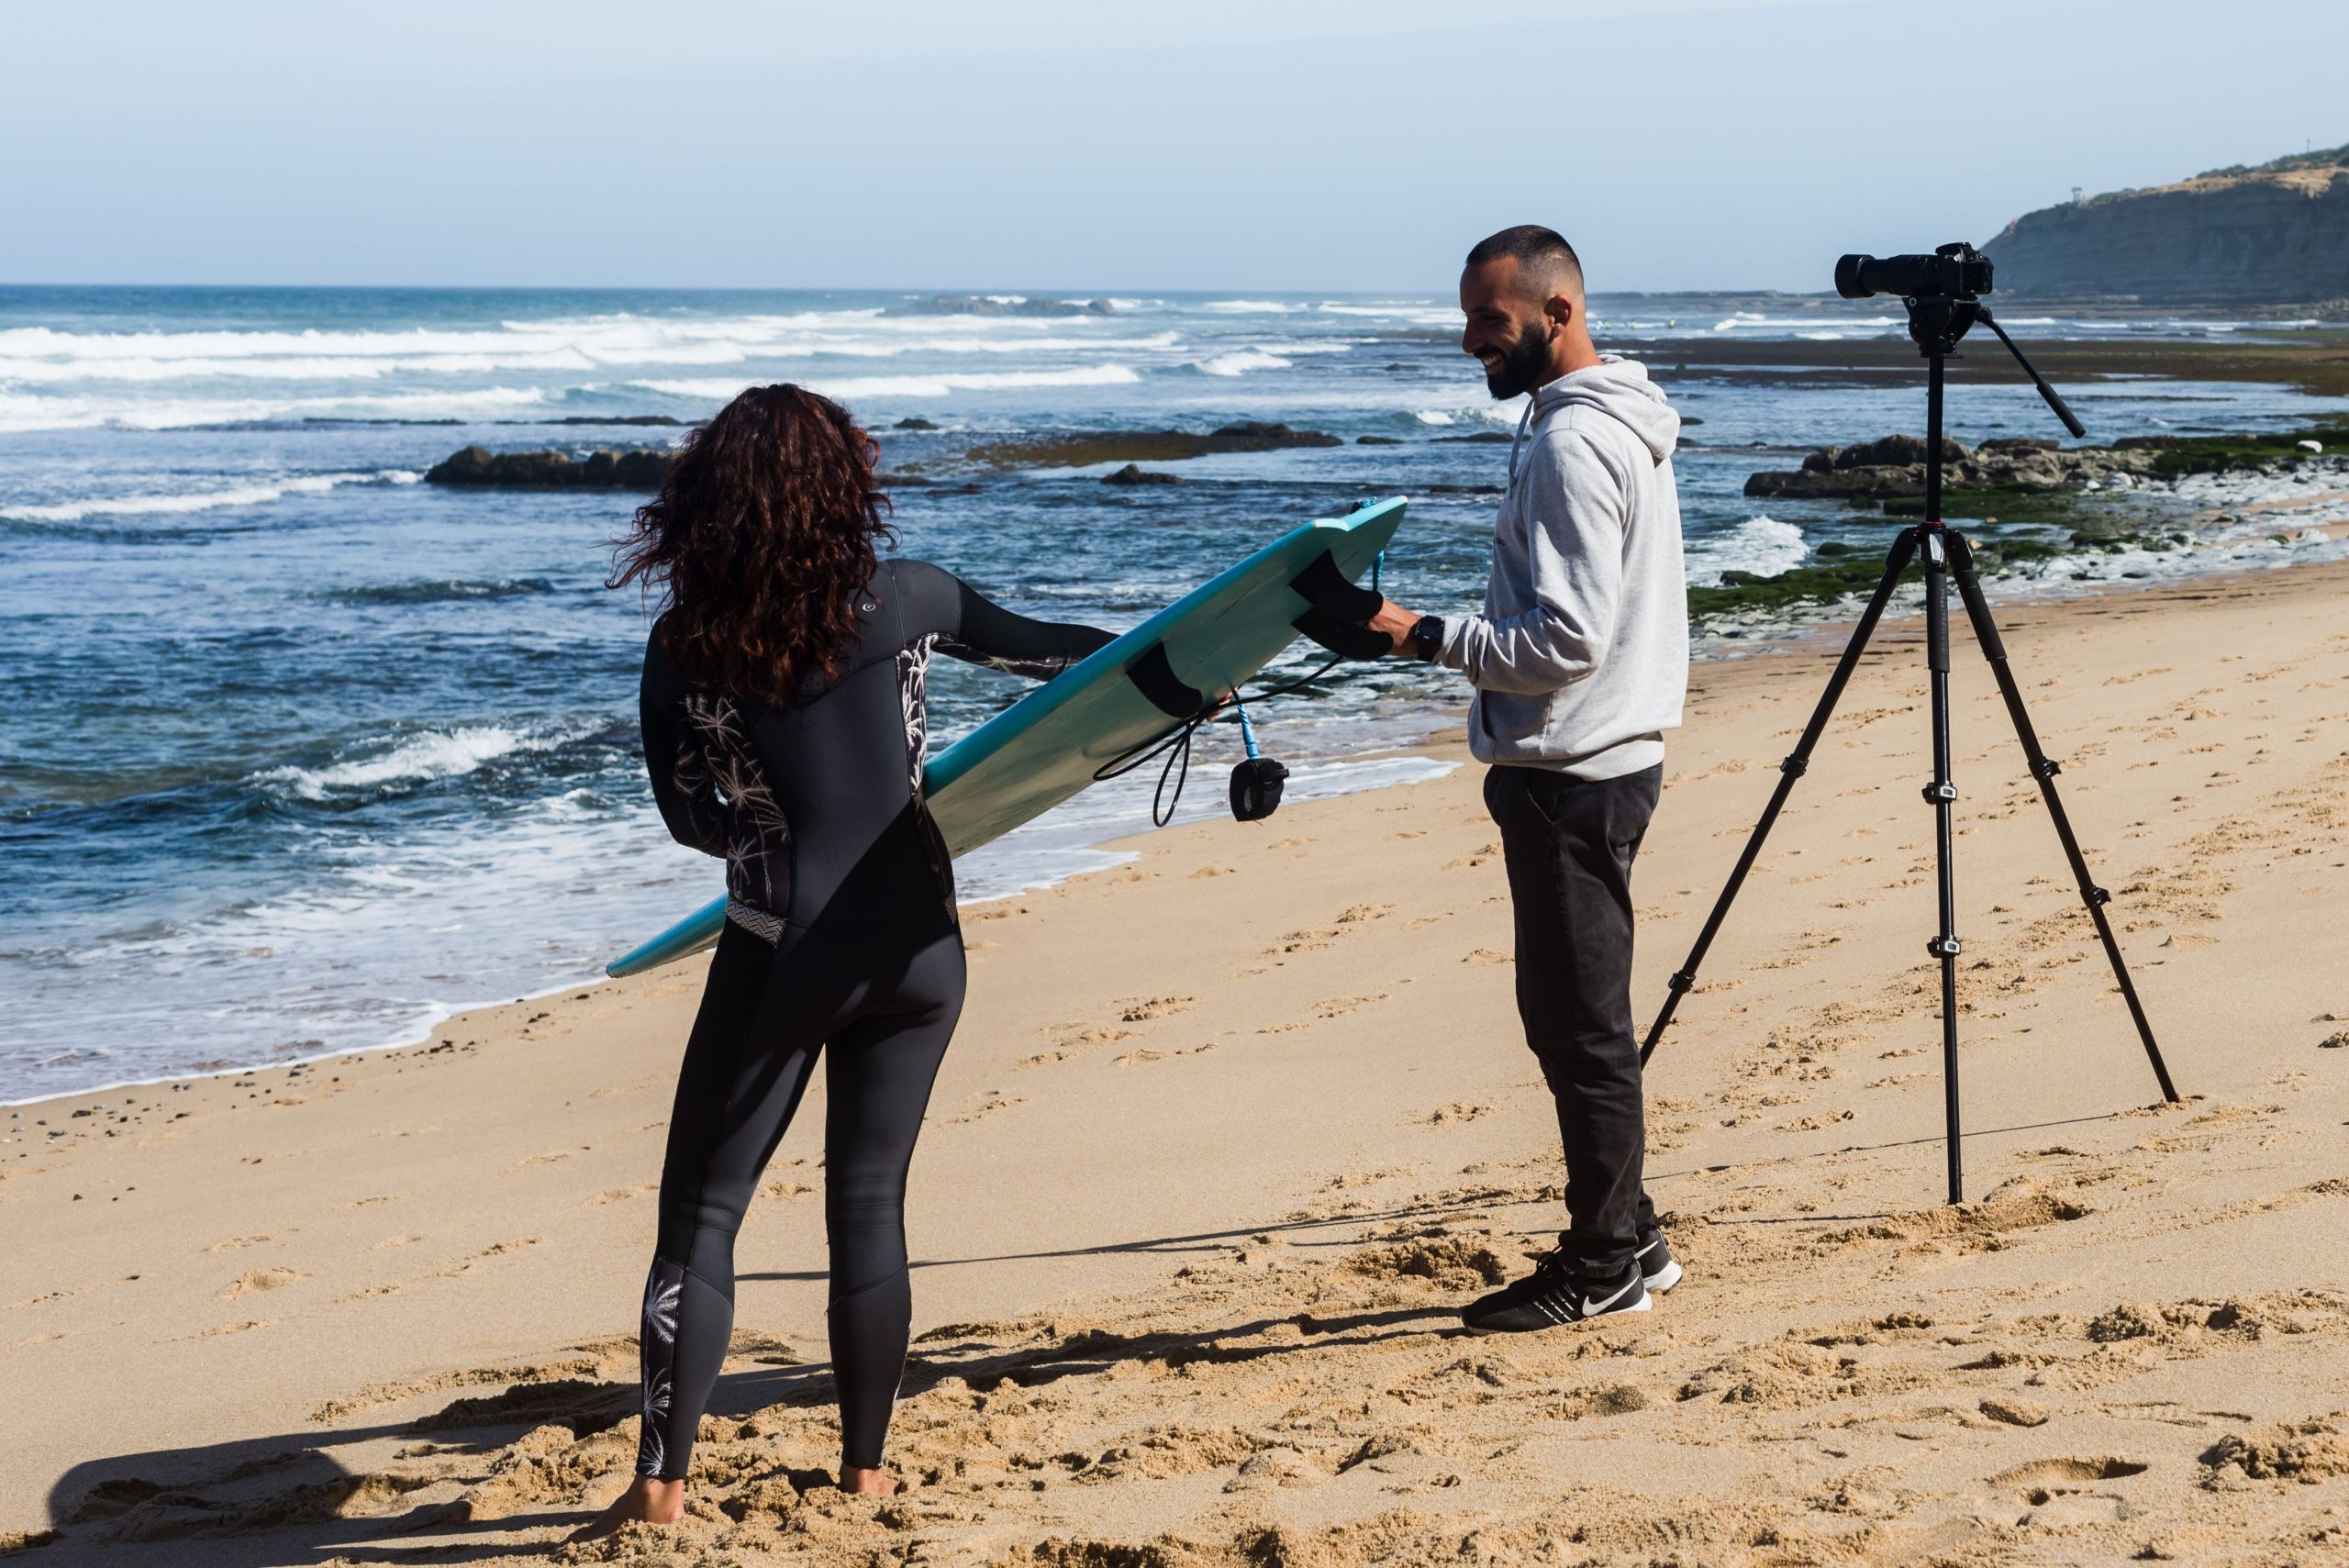 You are currently viewing Enhance Your Surfing Skills in Ericeira with Professional Surf Coaching